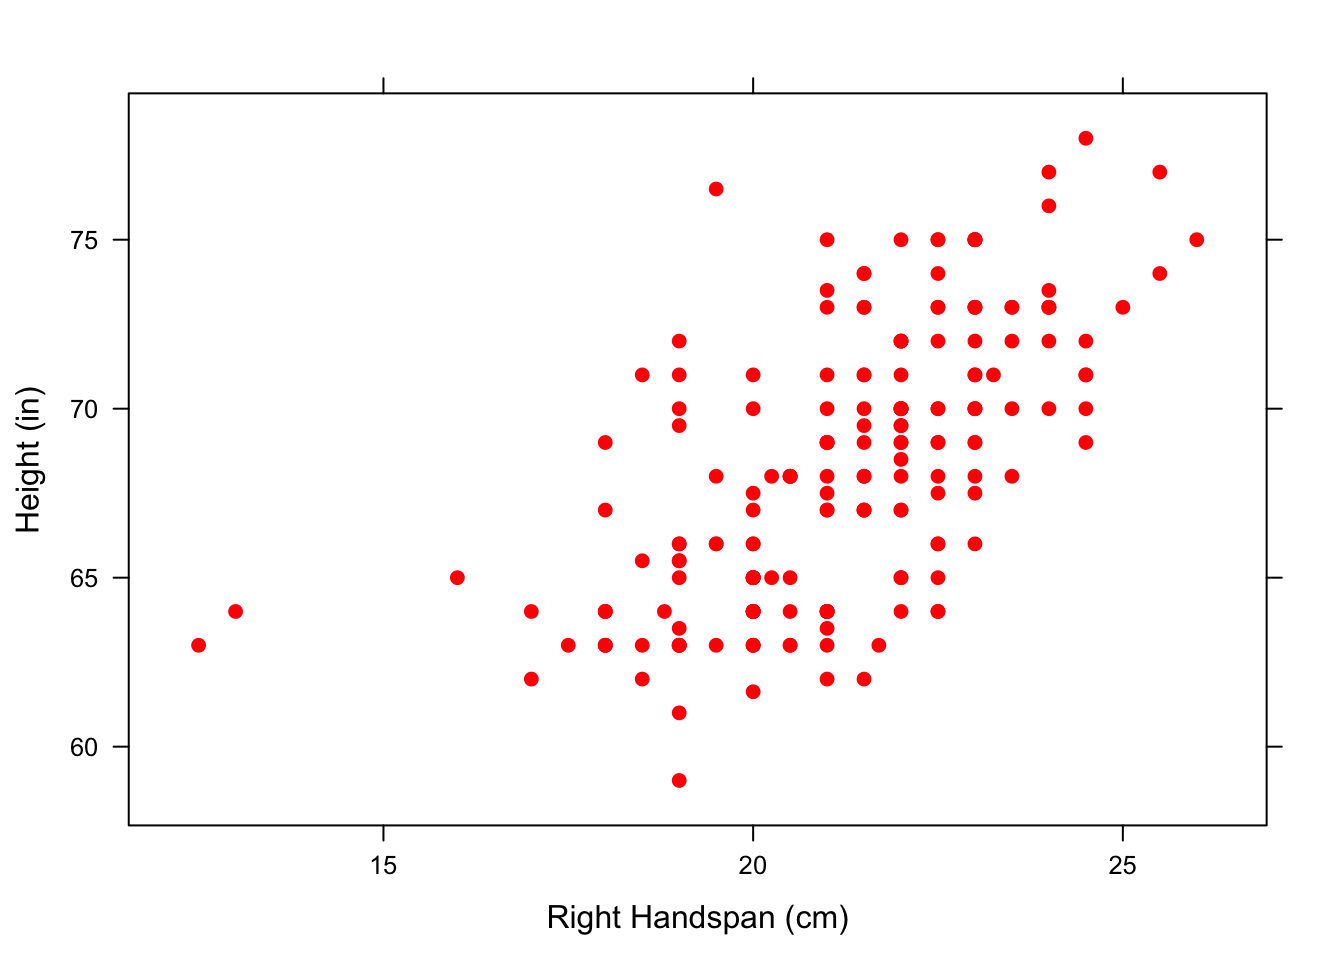 Red Points:  Relationship Between Right Handspan and Height using solid red points